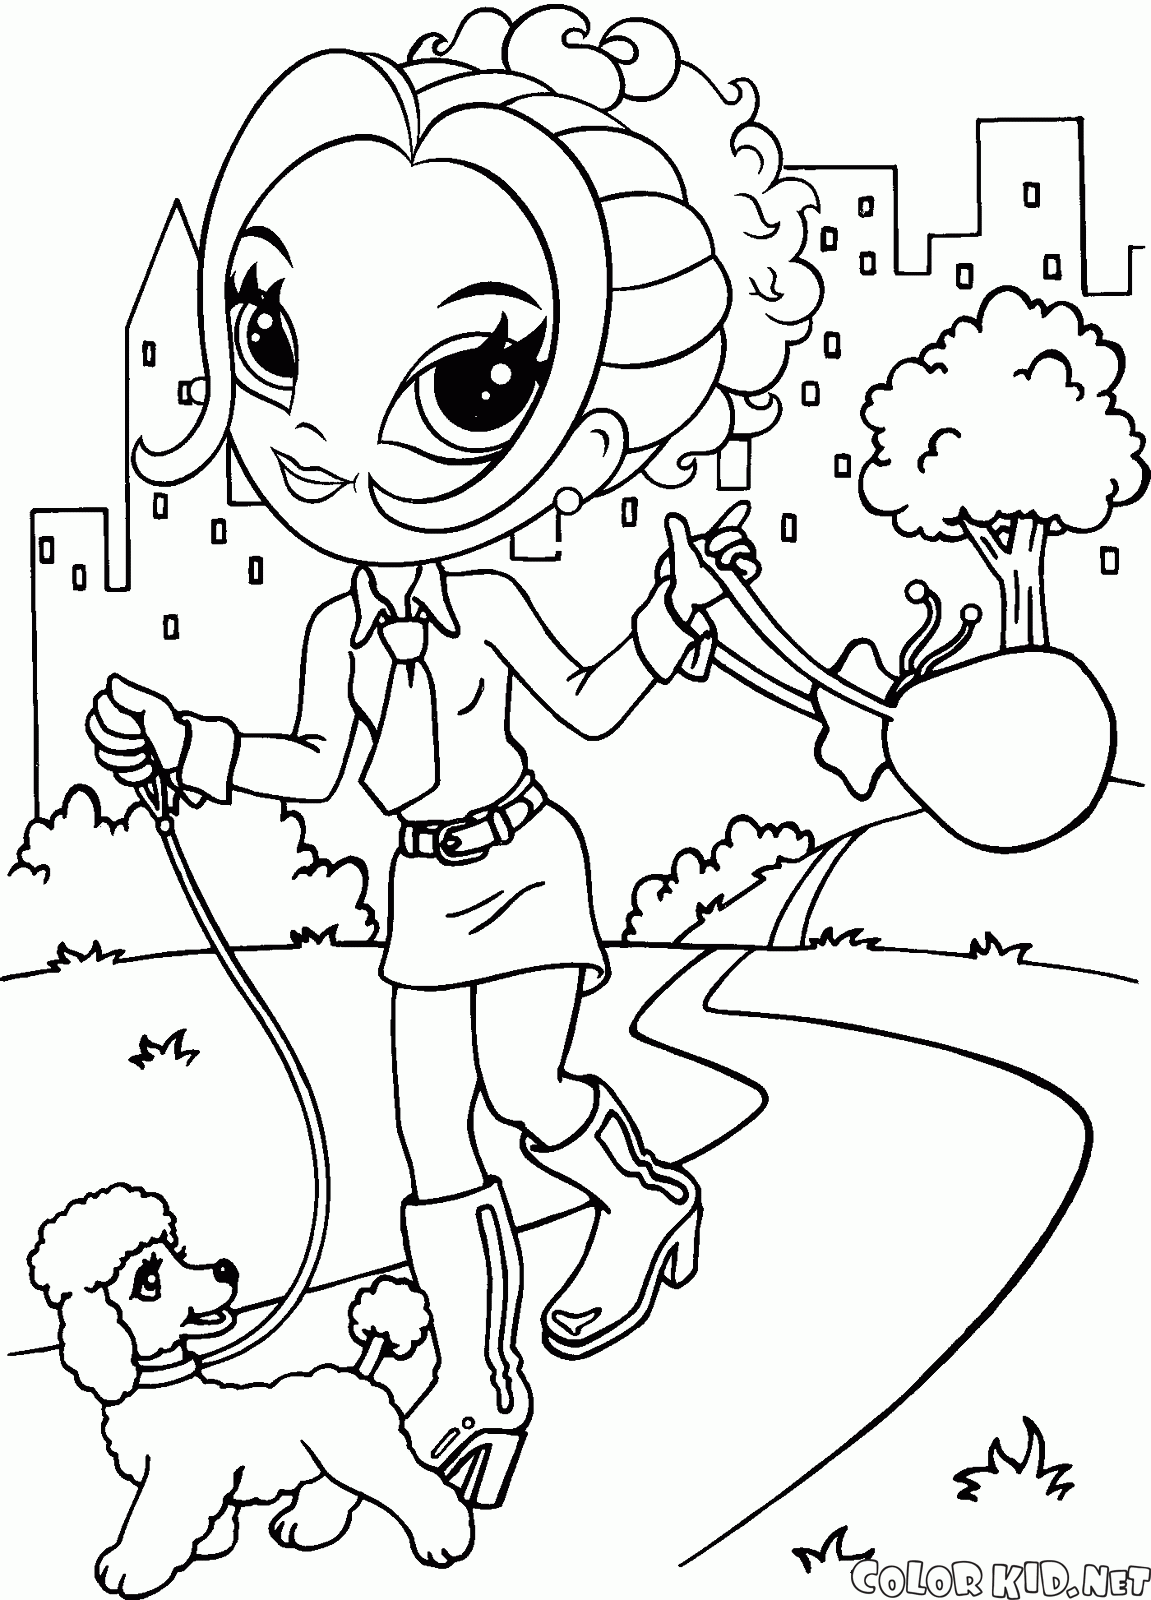 Coloring page Lisa Frank Glamour Girl